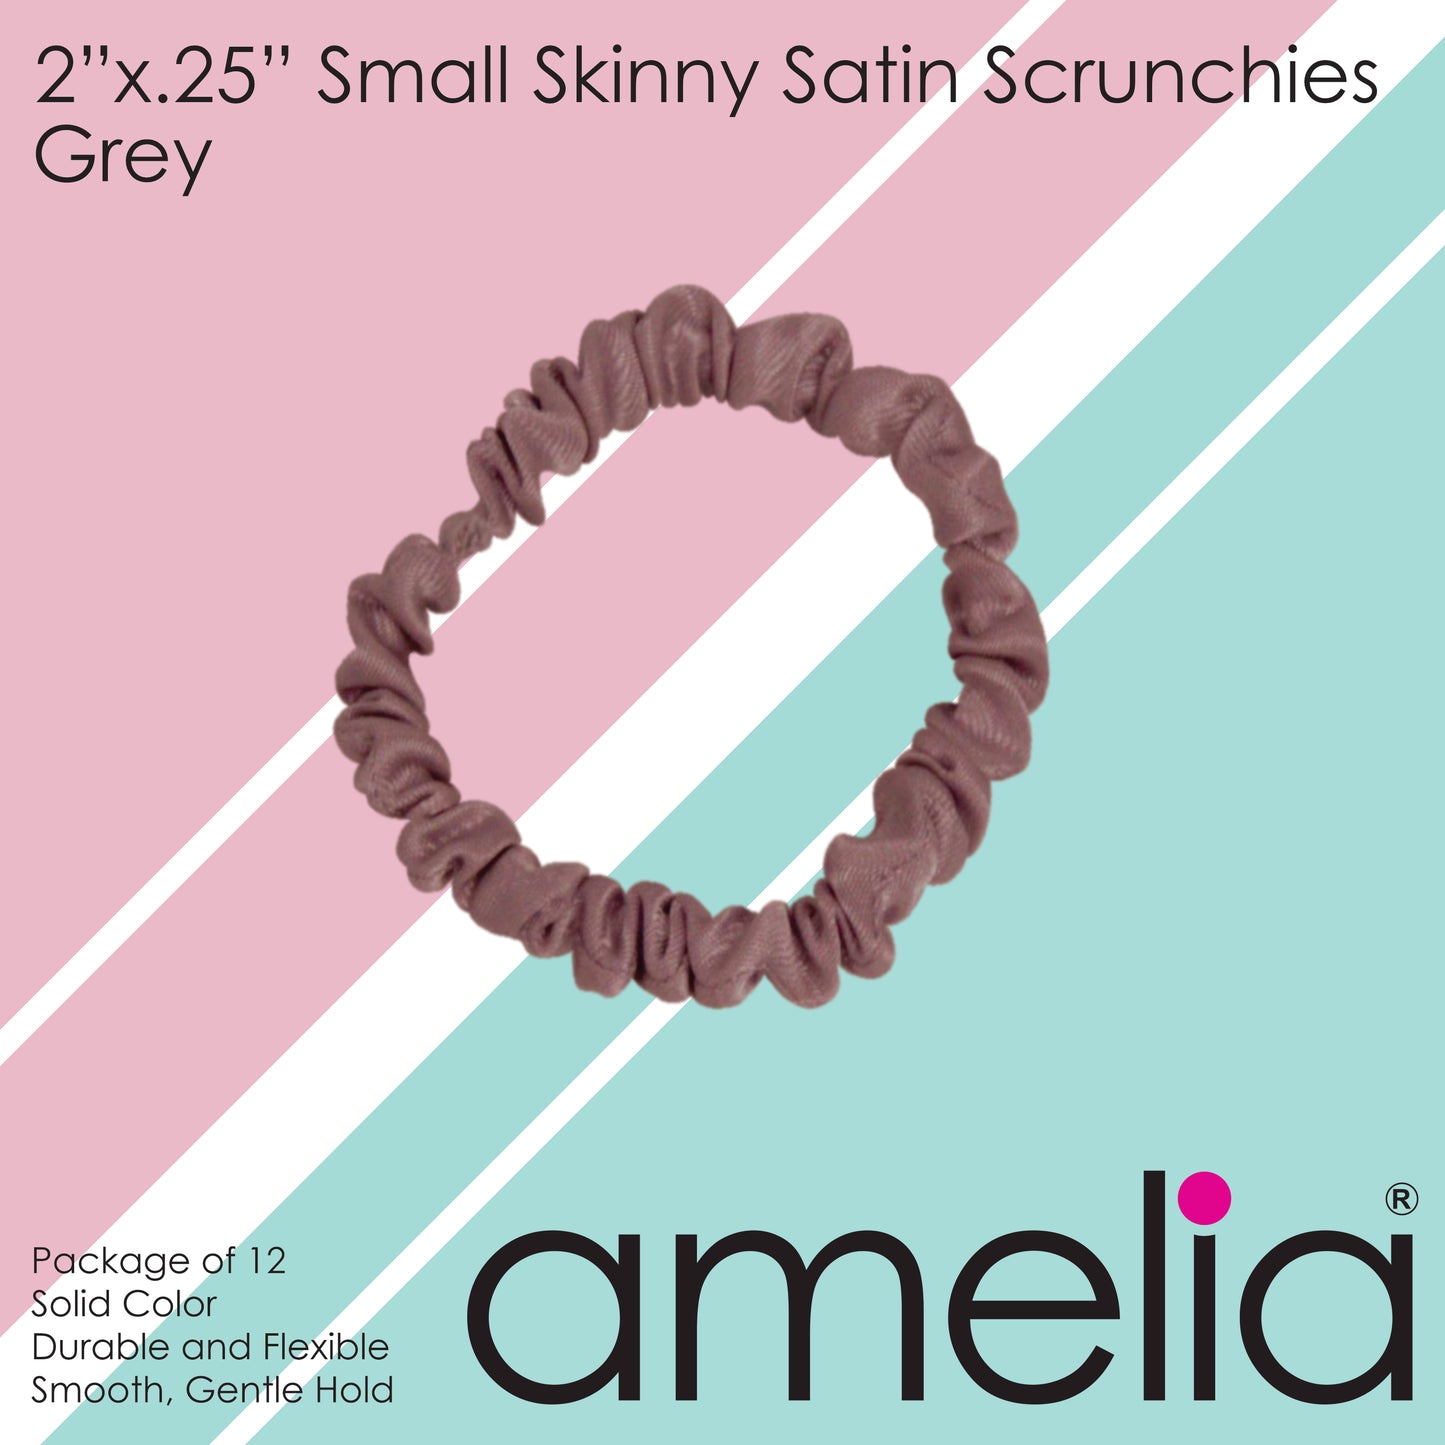 Amelia Beauty, Grey Skinny Satin Scrunchies, 2in Diameter, Gentle and Strong Hold, No Snag, No Dents or Creases. 12 Pack